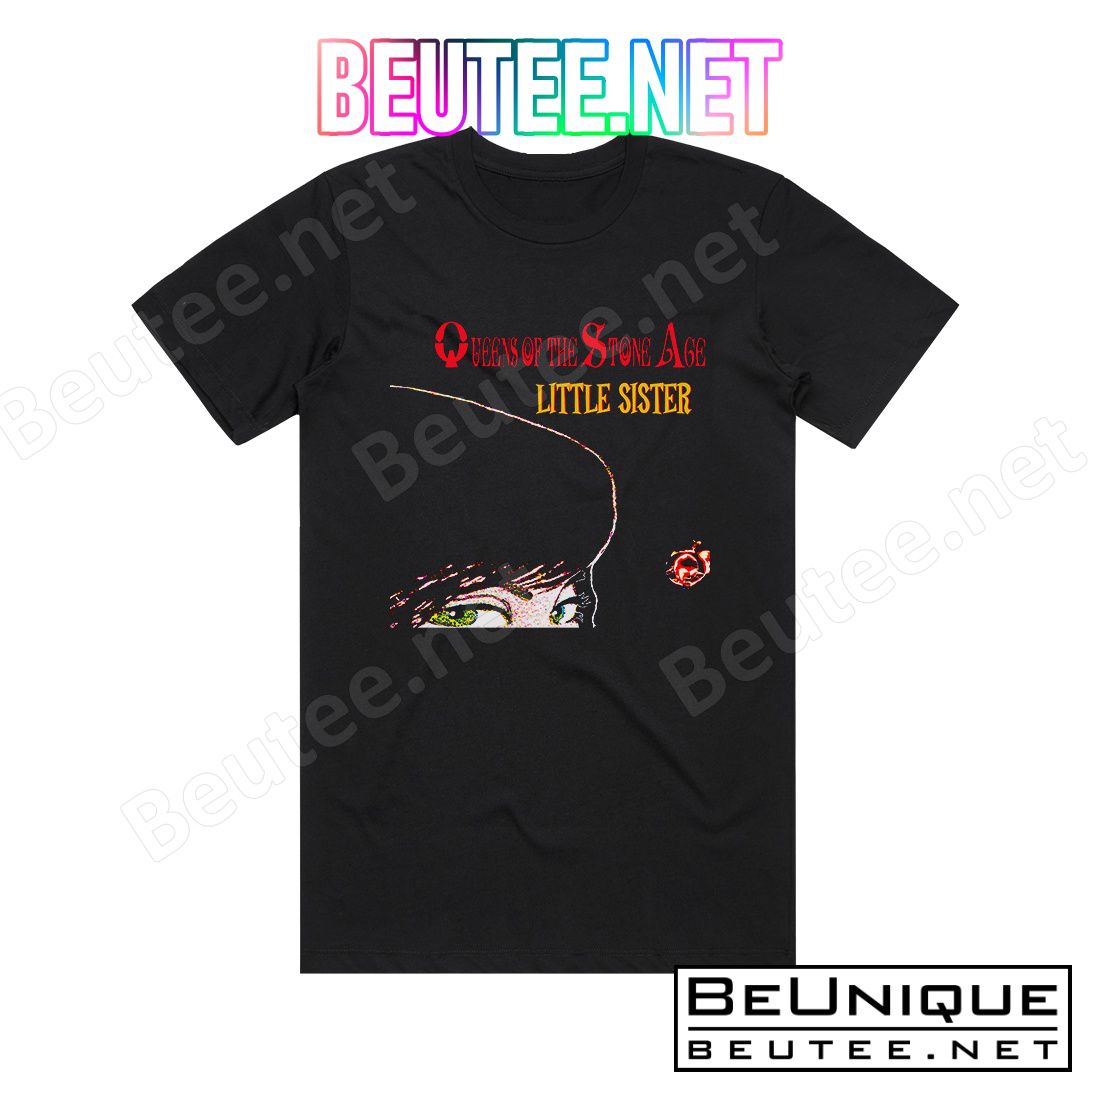 Queens of the Stone Age Little Sister Album Cover T-Shirt